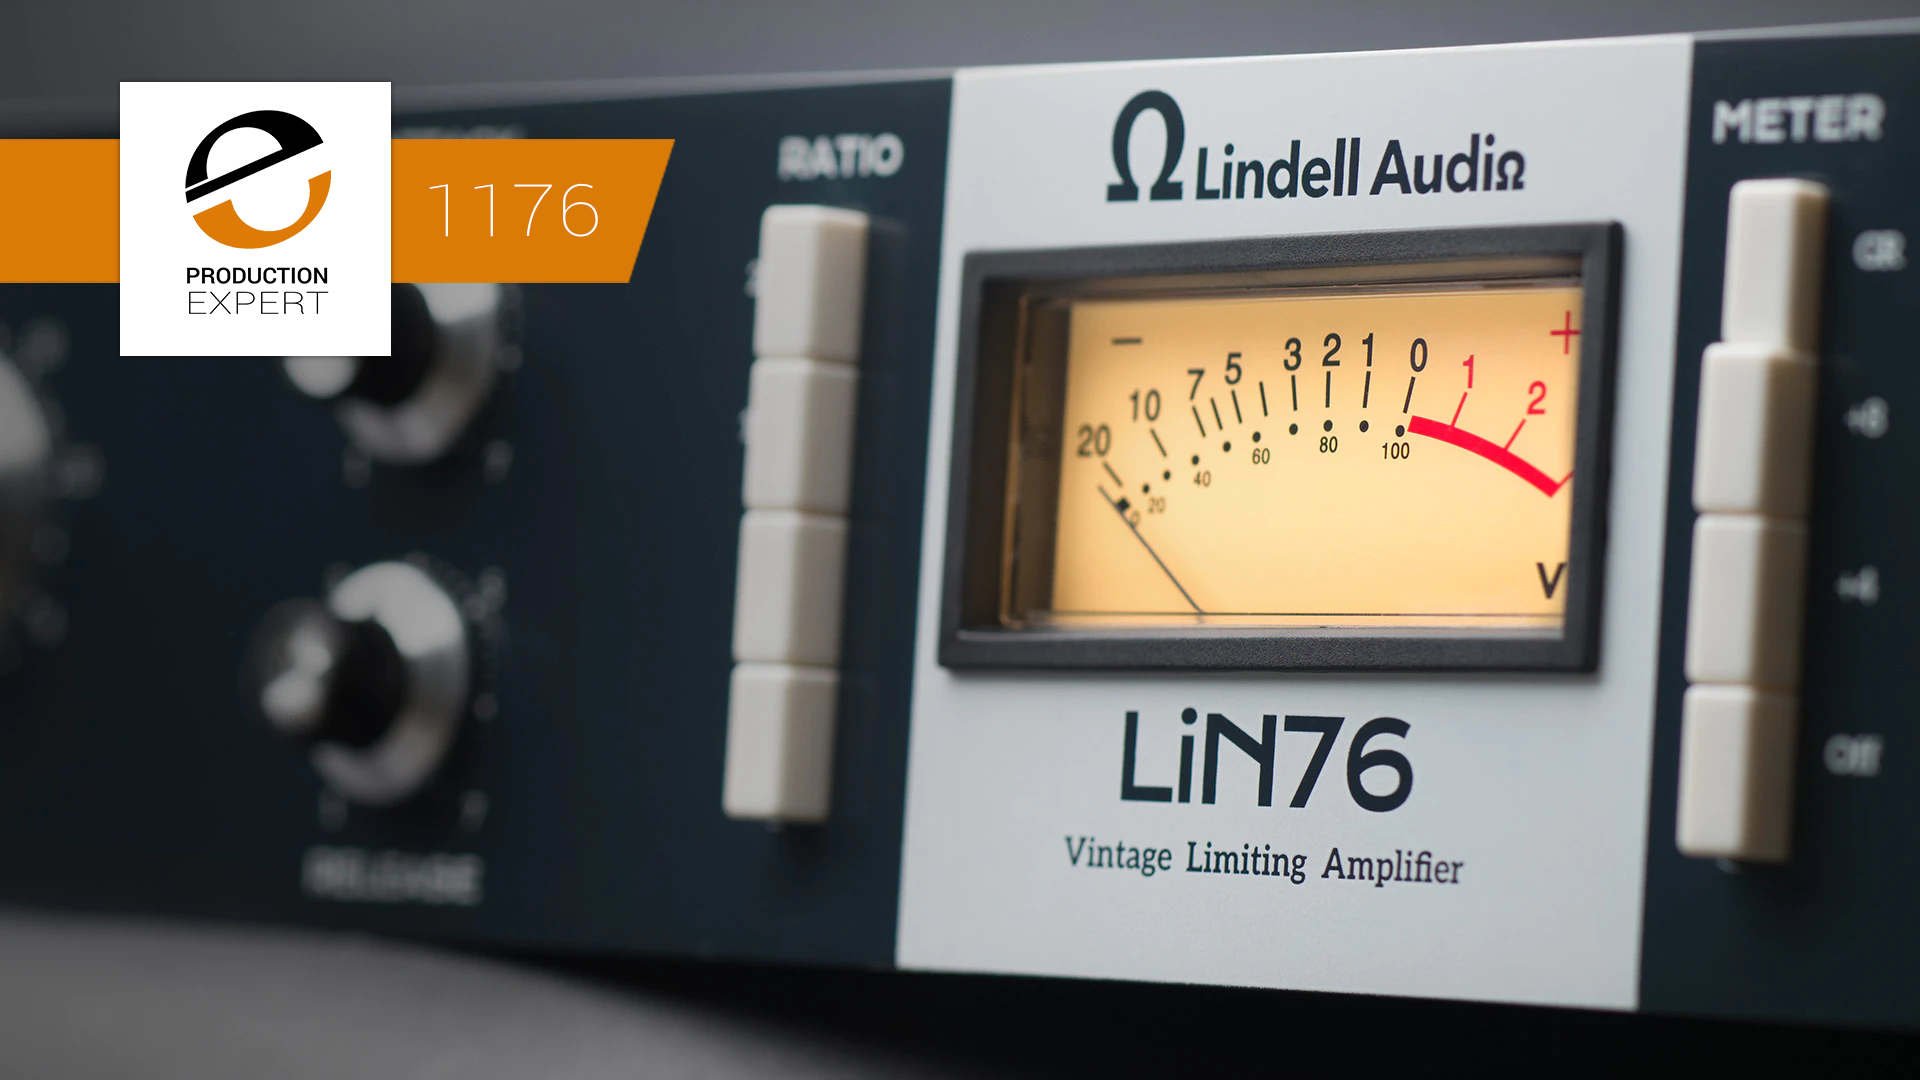 Lindell Audio Releases Low Cost 1176 Hardware - LiN76 Vintage 